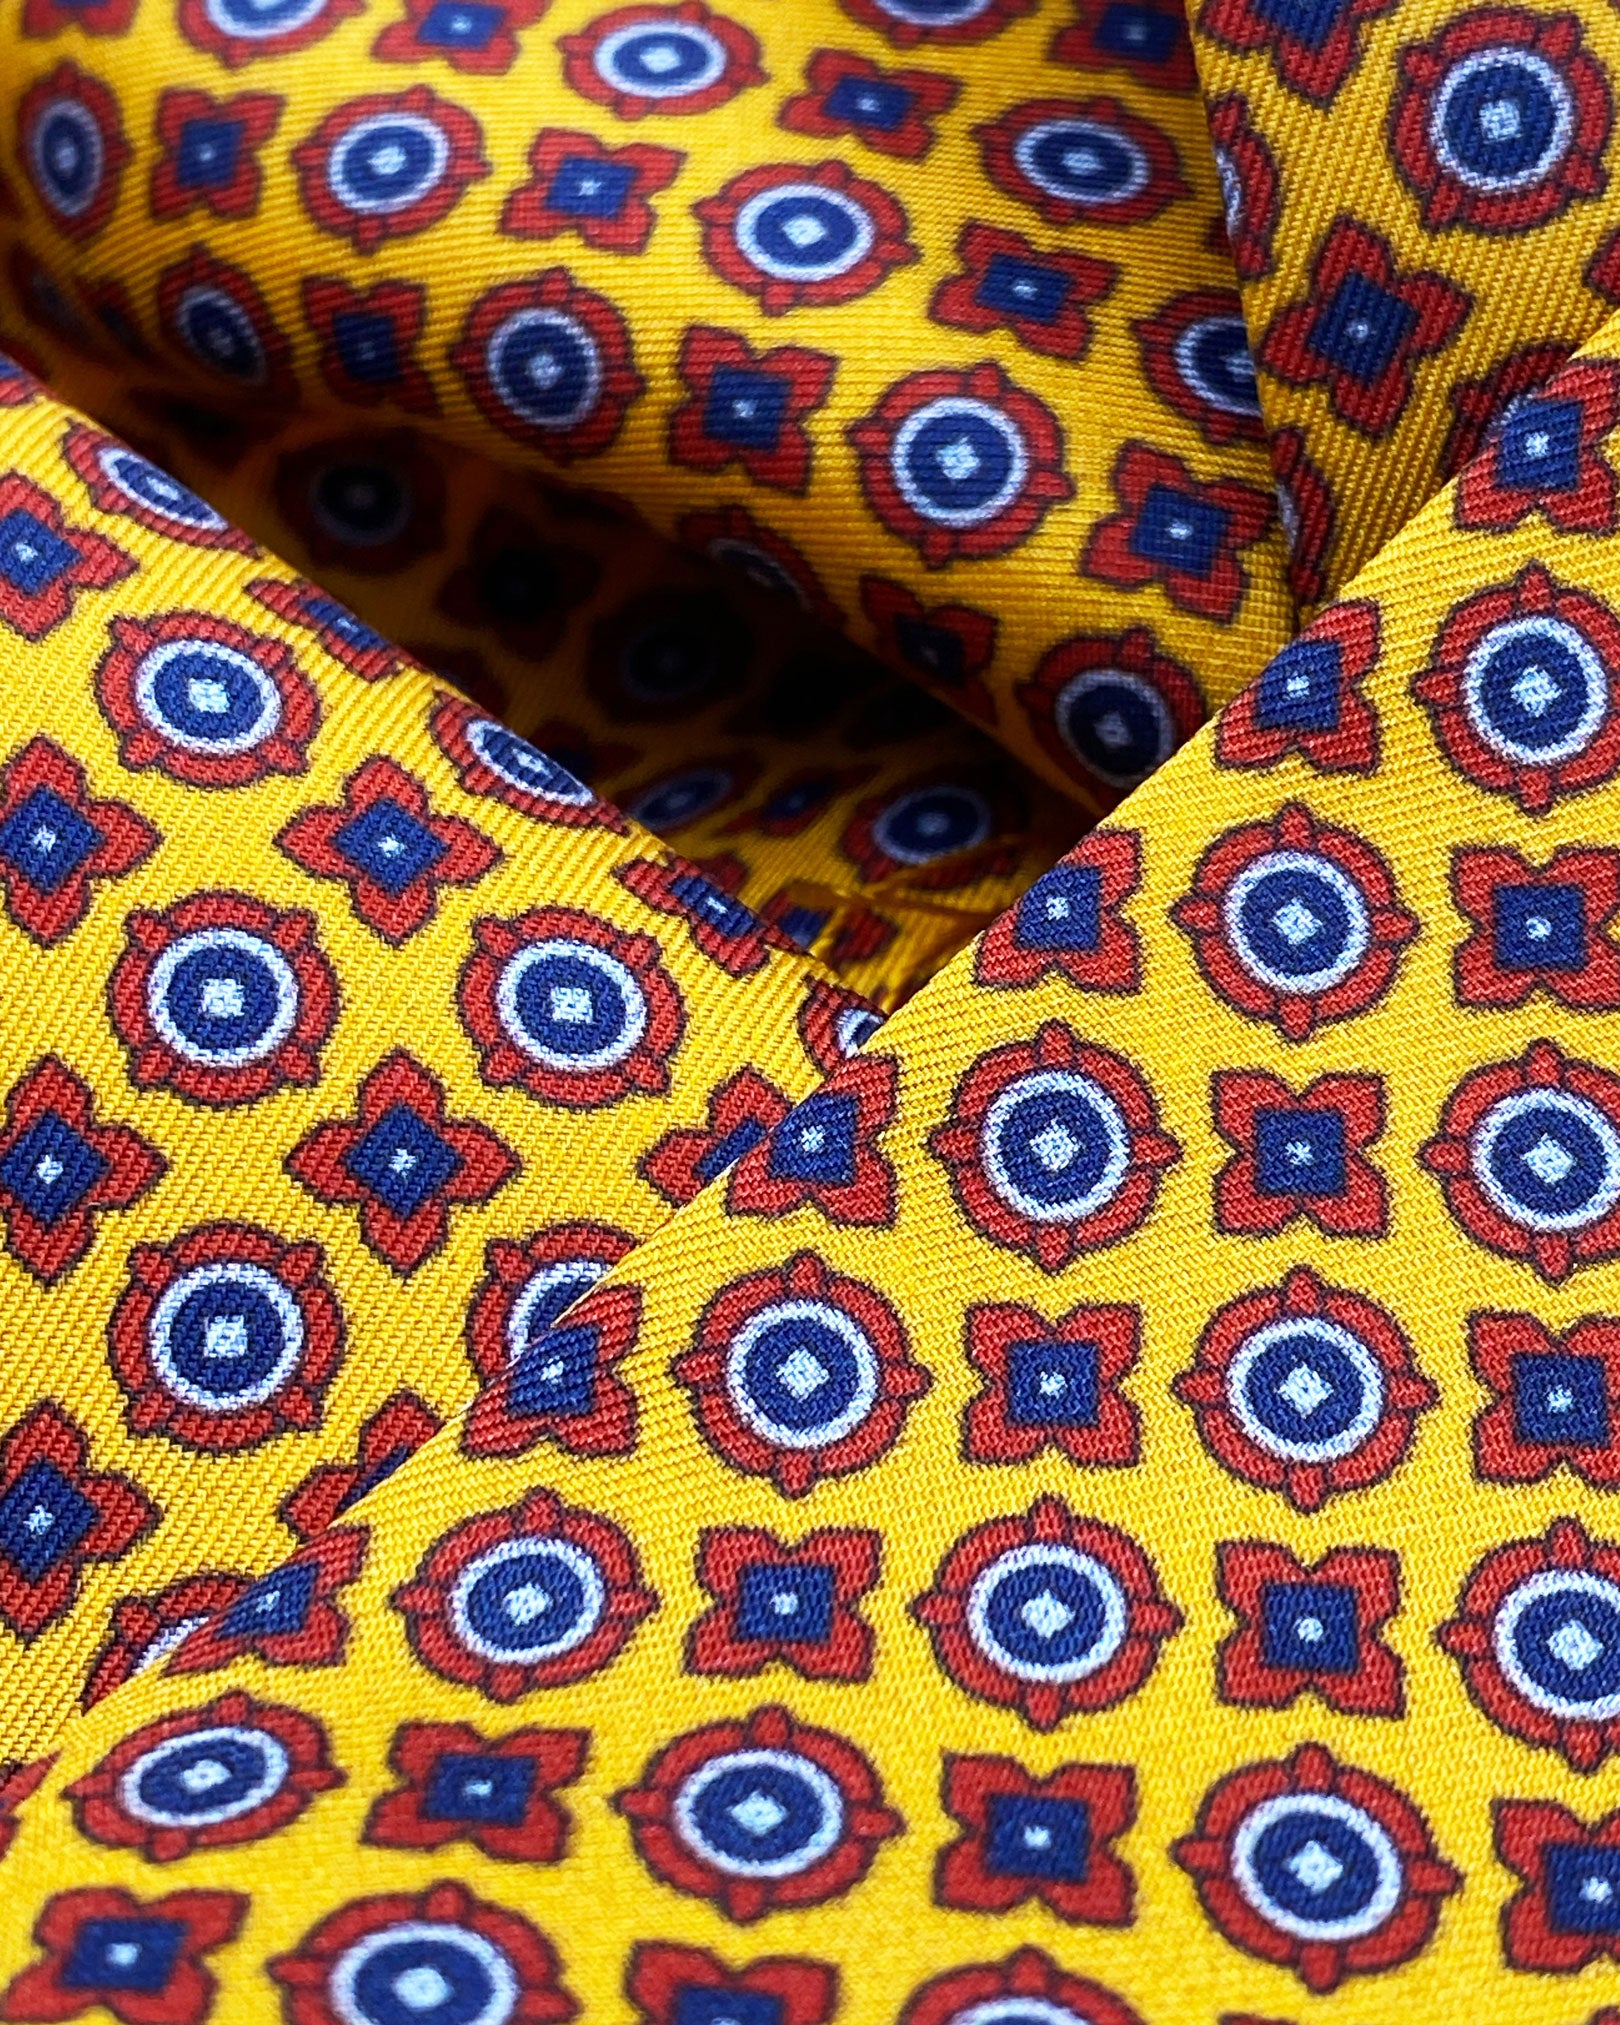 Ruffled close-up view of the Toshima silk scarf, presenting a closer view of the small blue and red stylised floral patterns on a golden-orange ground and lustre of the material.